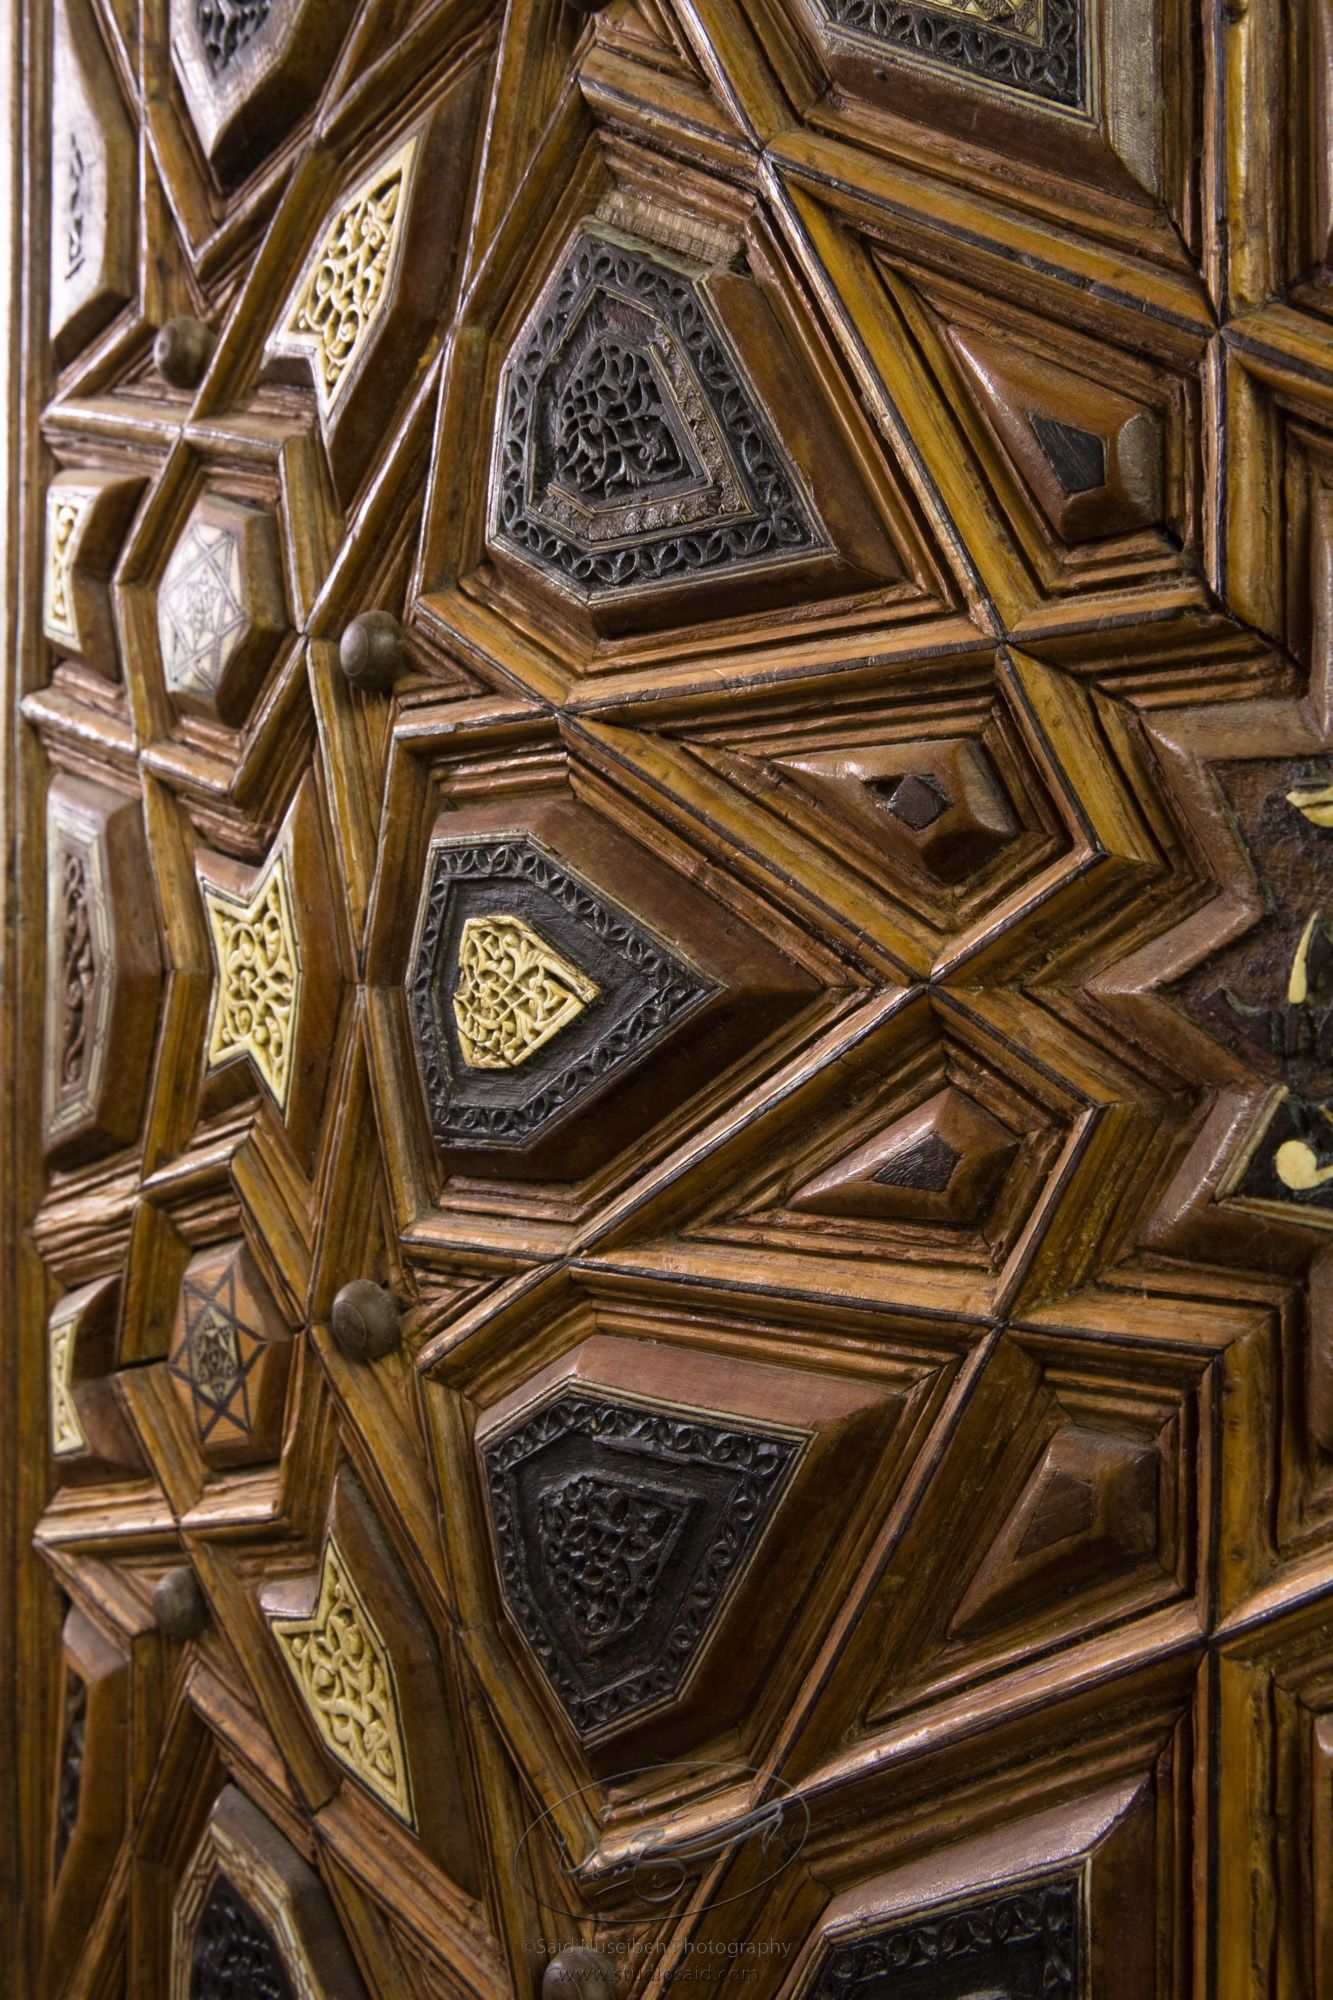 "Minbar, Carved Woodwork, Ivory and Inlay Detail"The late-13th / early-14th c. Mamluk minbar, or pulpit, of Sultan al-Nasir Muhammad, the ninth Mamluk Sultan from Cairo and son of Qalawun. The minbar was located in the Umayyad Mosque in Aleppo, Haleb, prior to its damage and disappearance in May 2013.